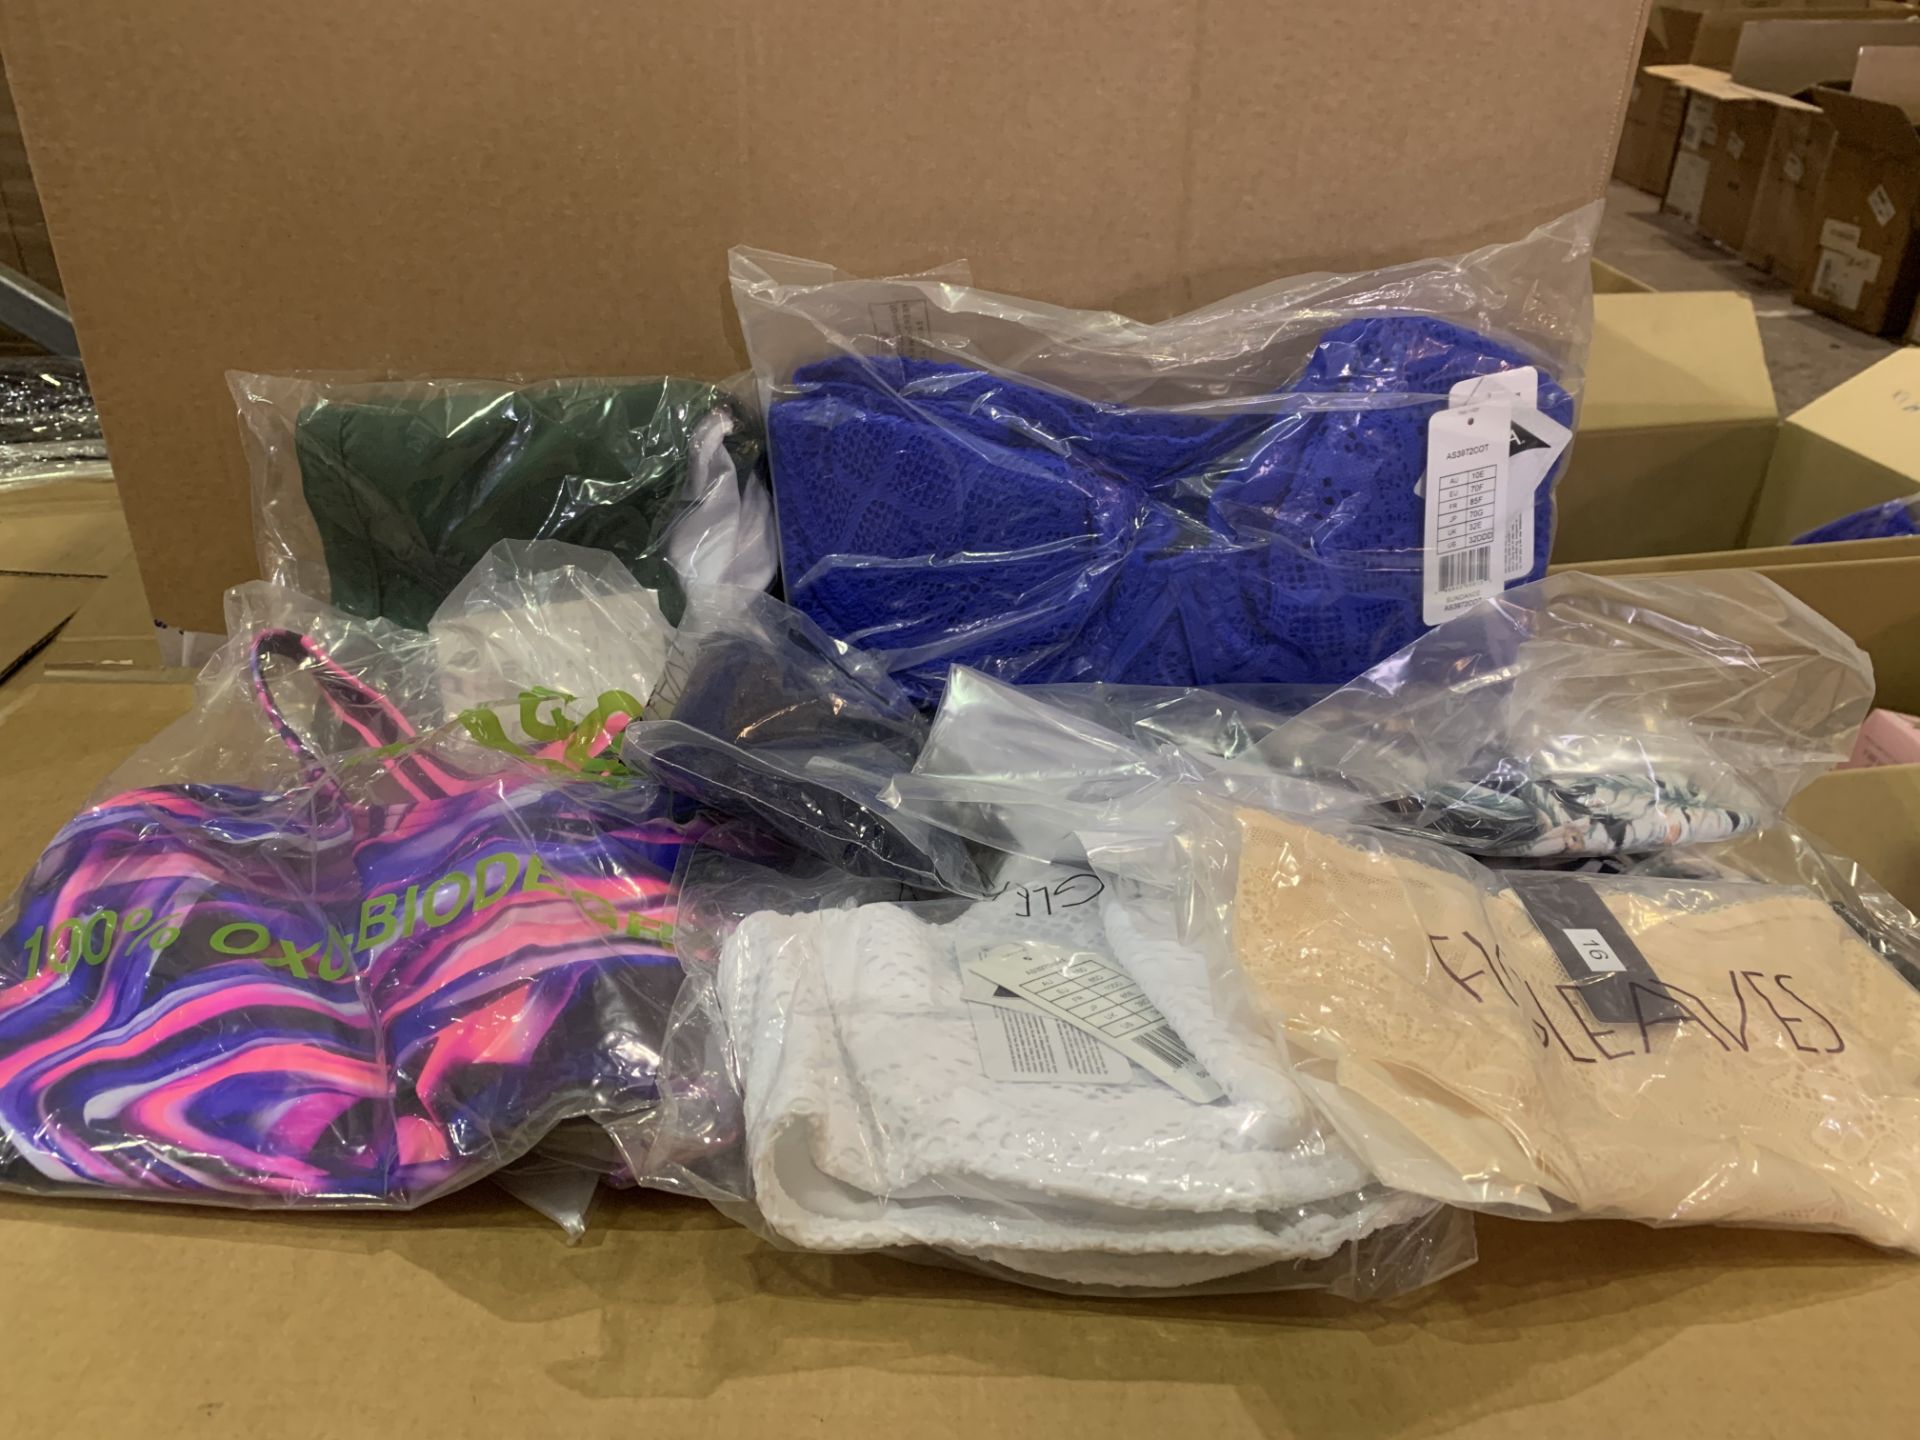 24 X BRAND NEW INDIVIDUALLY PACKAGED VARIOUS FIGLEAVES SWIMWEAR AND UNDERWEAR IN VARIOUS STYLES